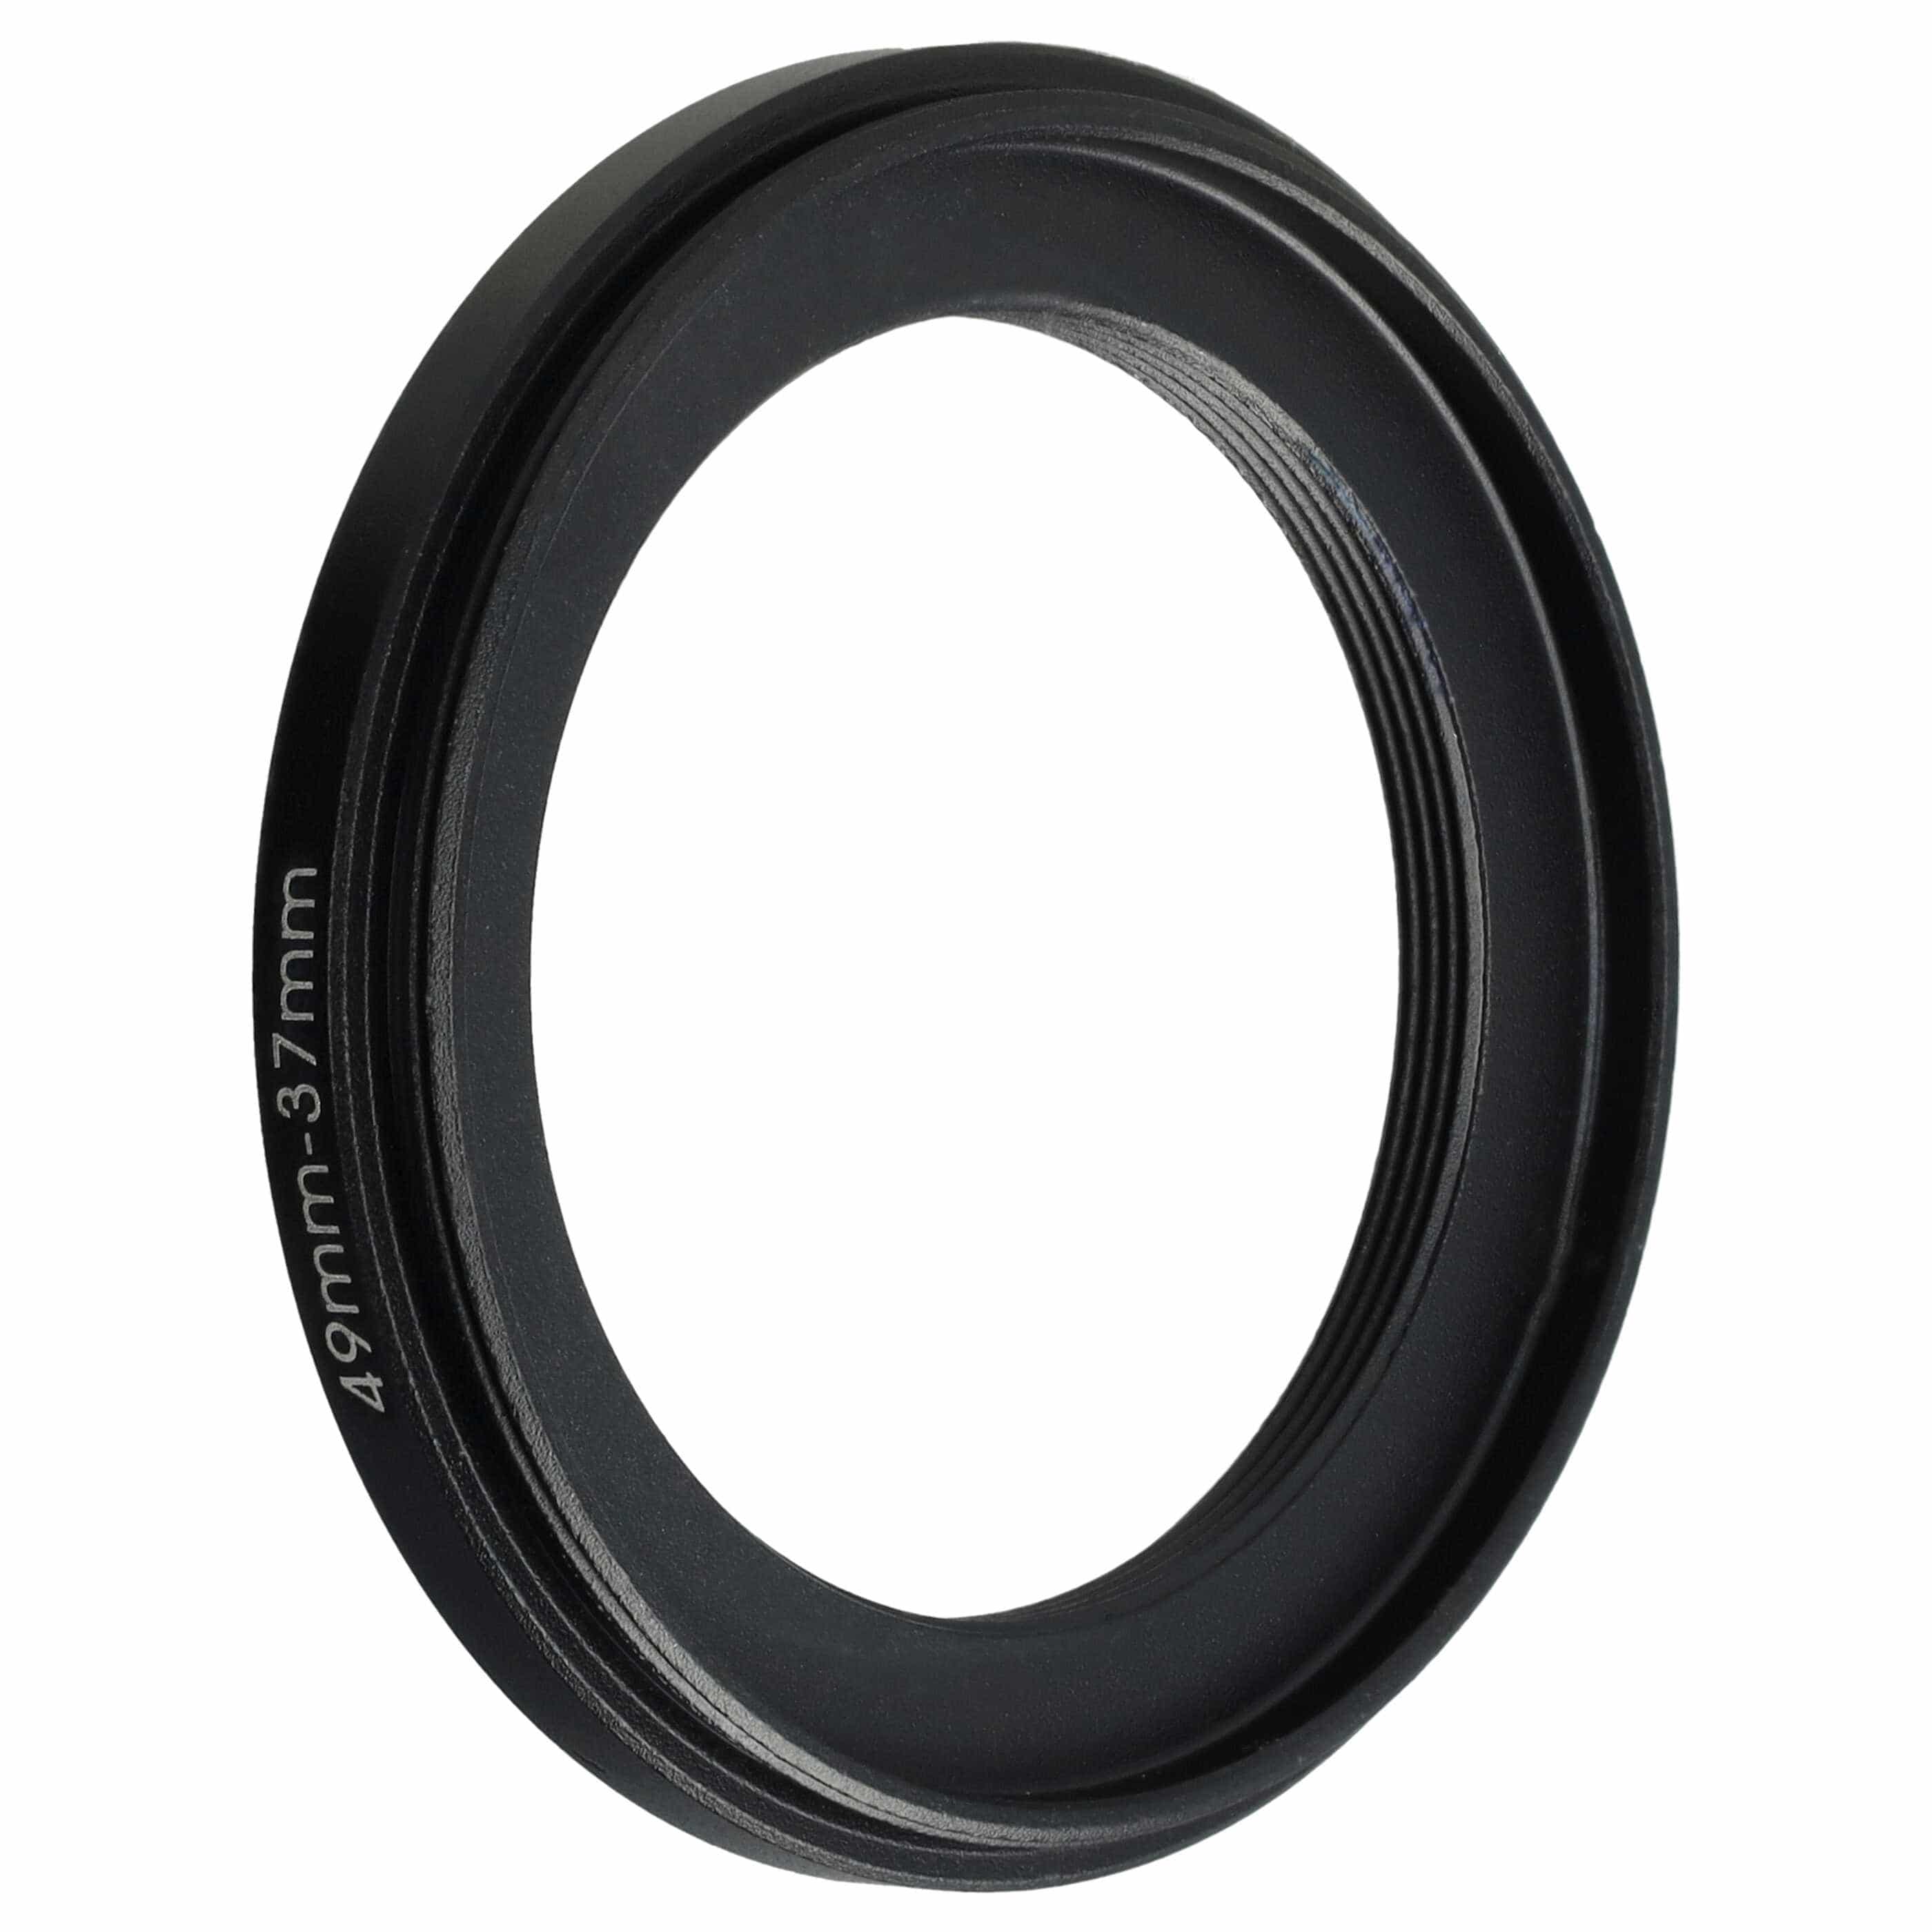 Step-Down Ring Adapter from 49 mm to 37 mm for various Camera Lenses